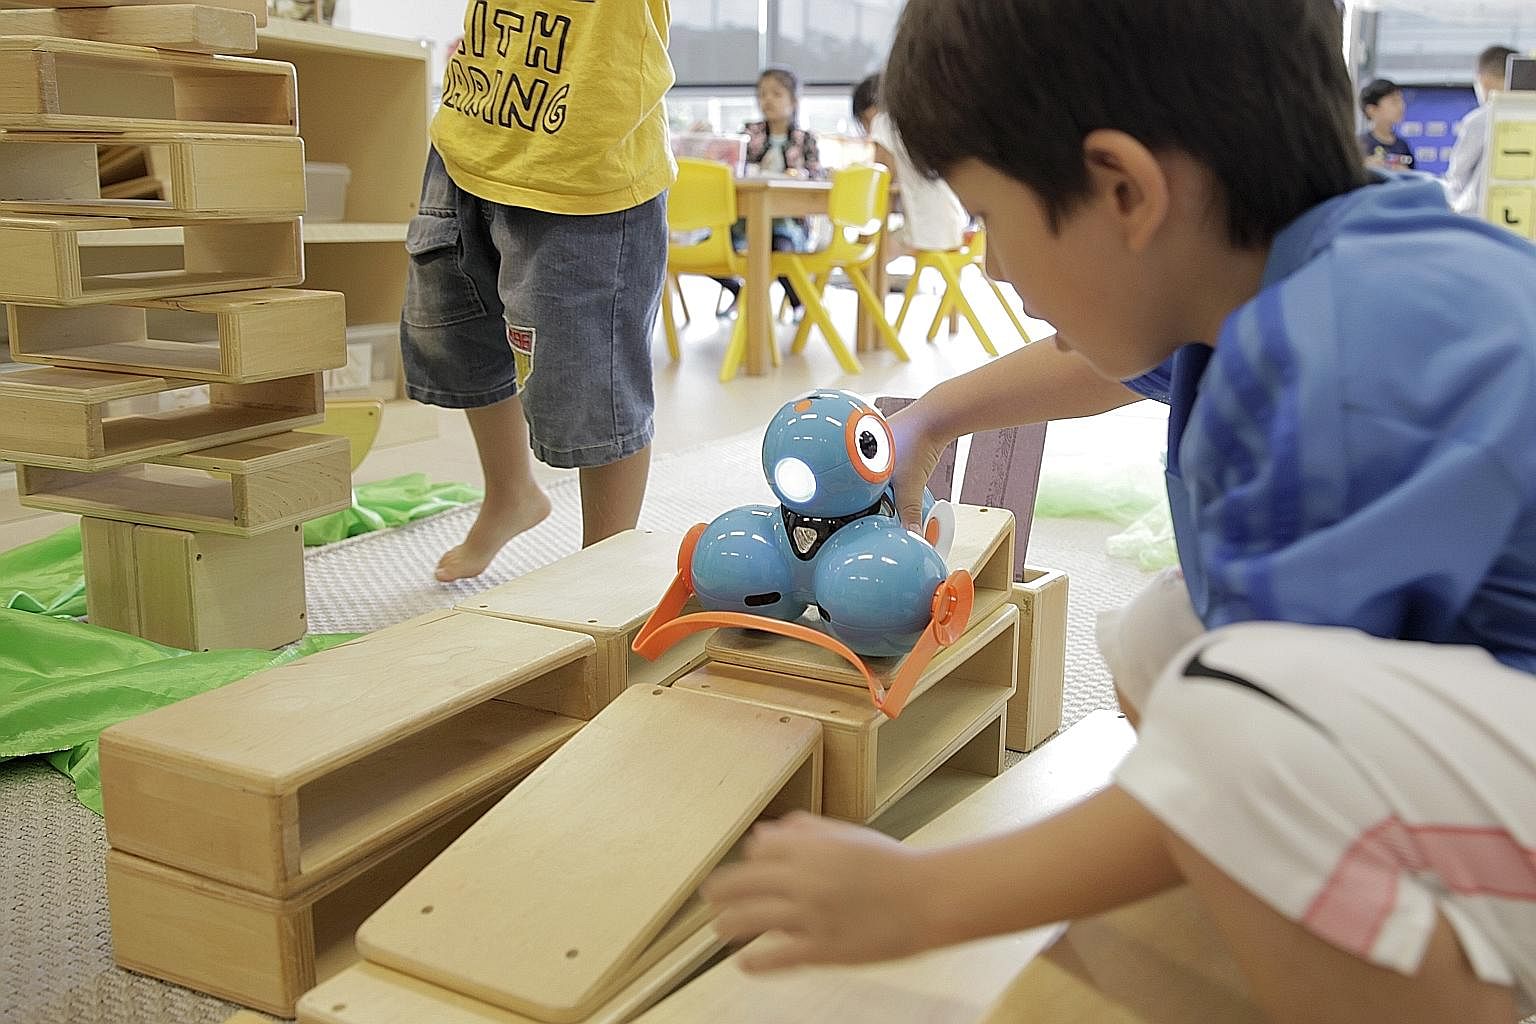 Play@TP adopts an inquiry-based approach so children can explore topics of their interest rather than fixed lessons.